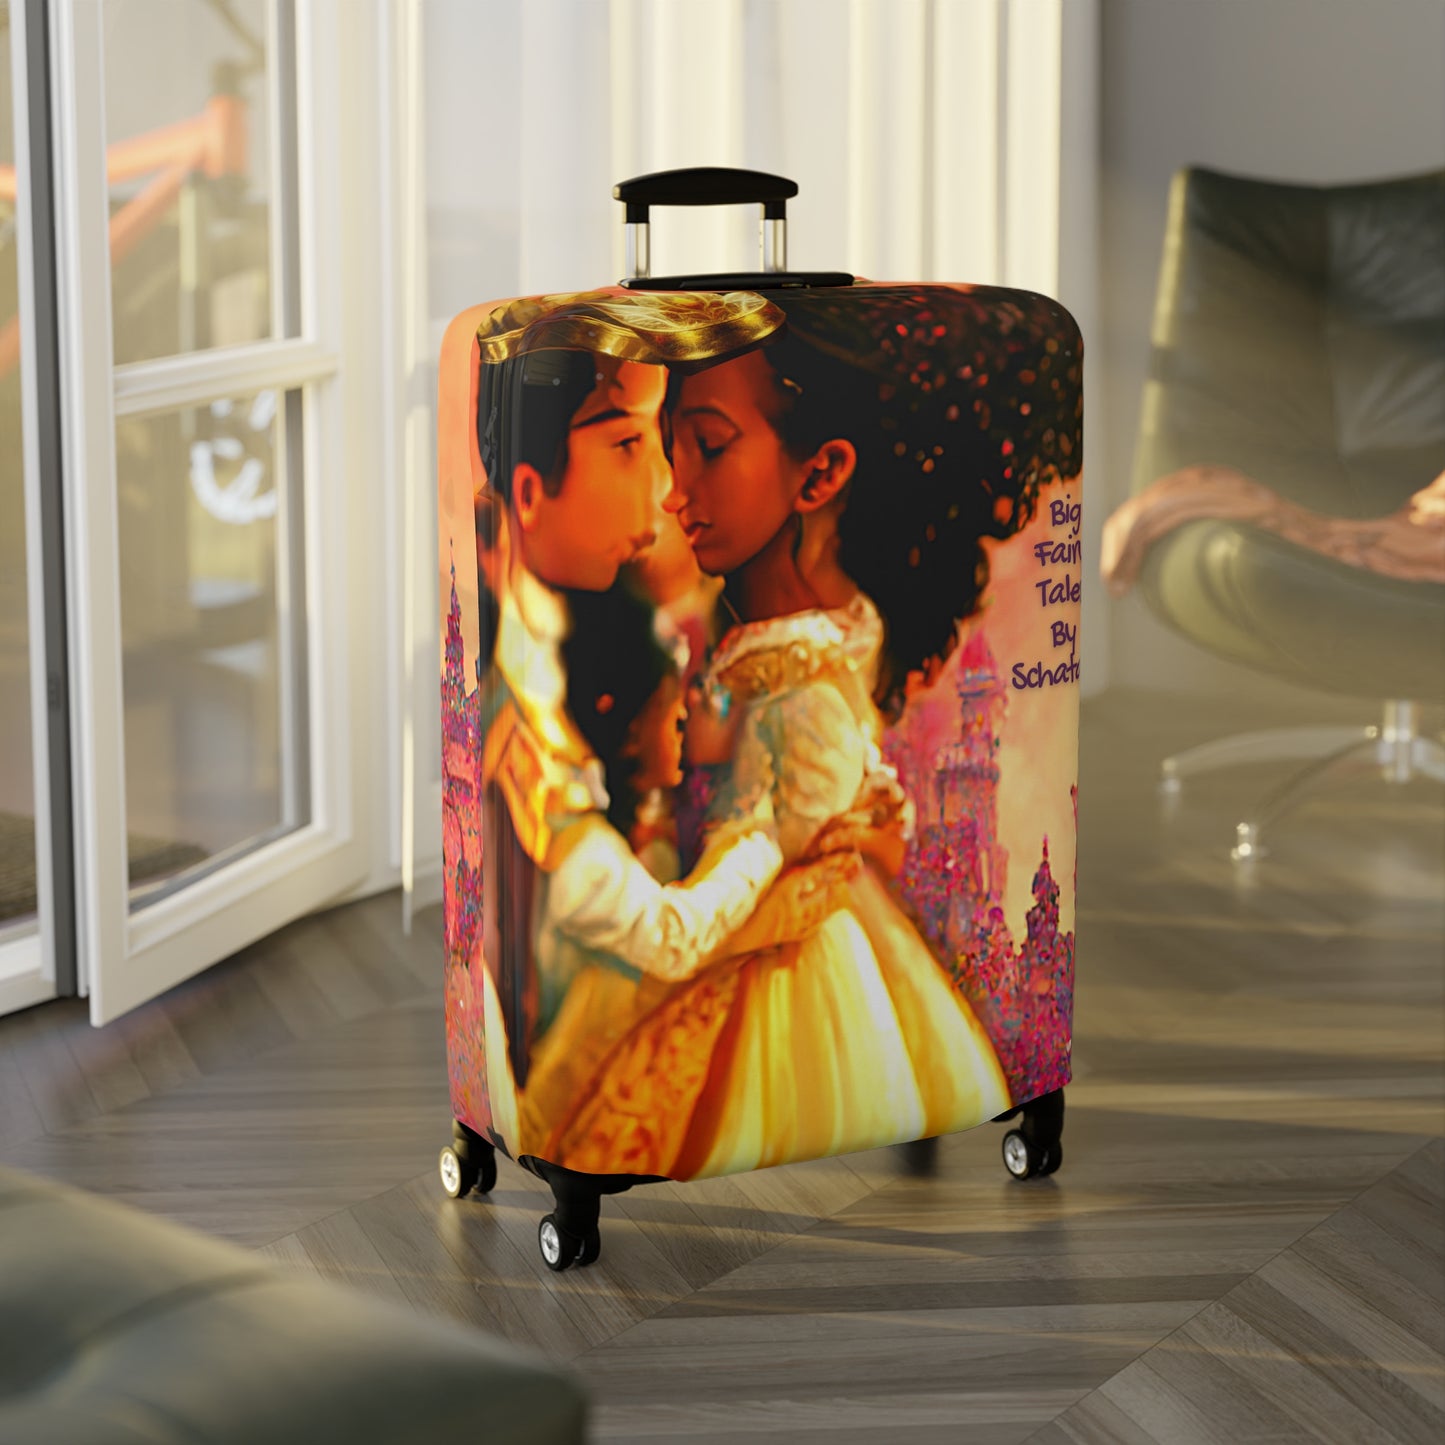 Big Fairy Tales By Schatar Romeo's Juliet Luggage Cover